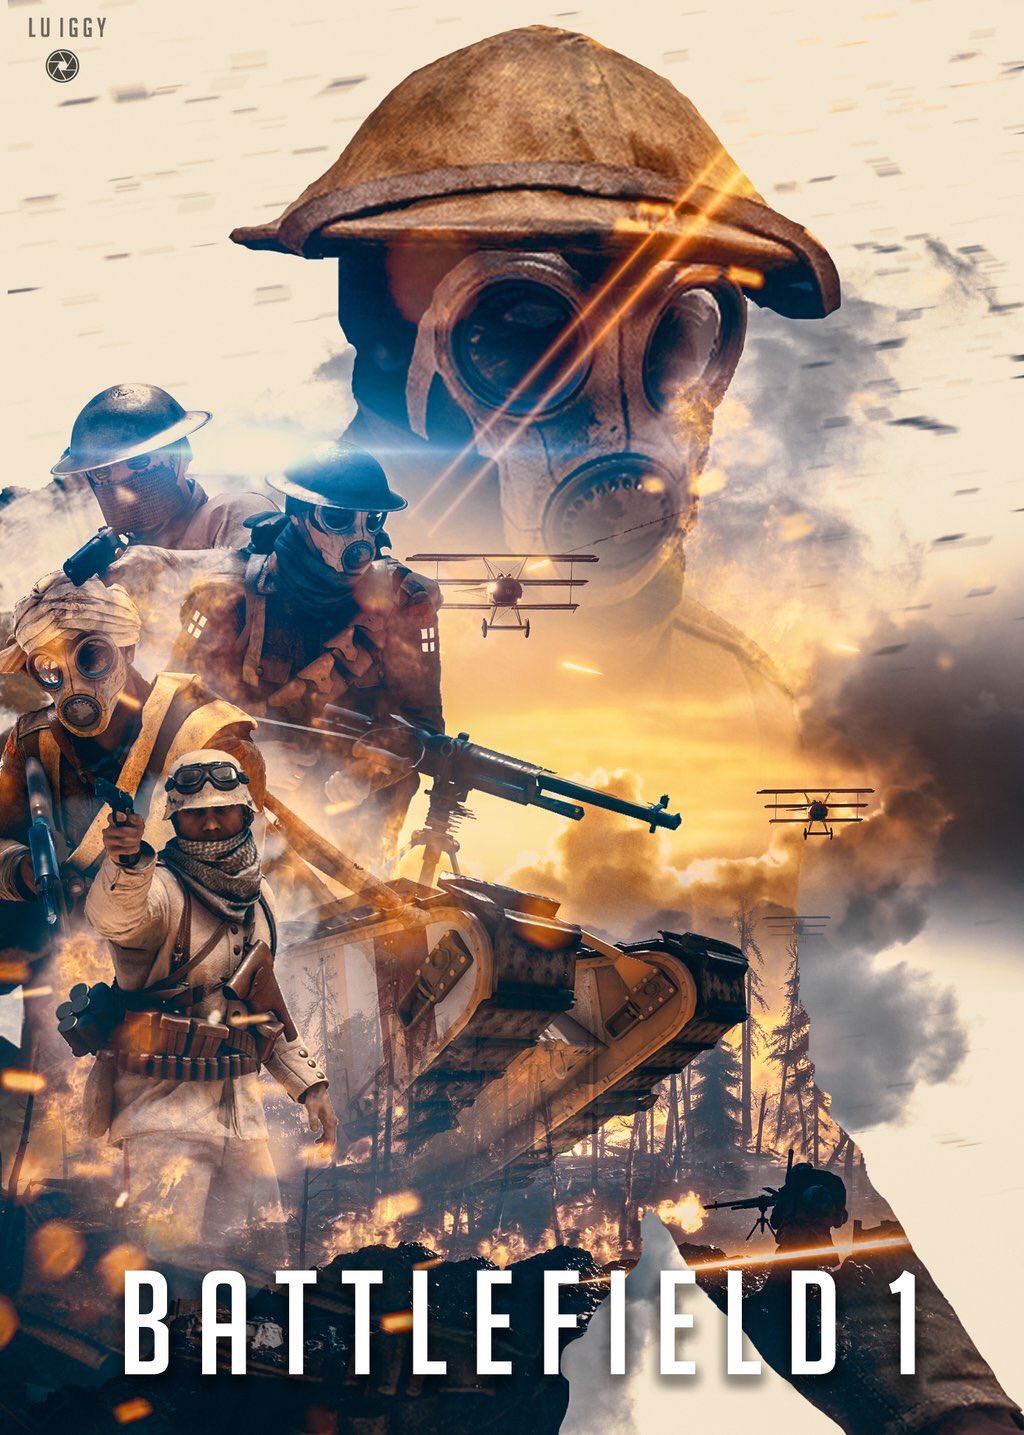 Captures on Twitter: "Another epic @Battlefield 1 poster by @Lu_IggyO_o made using my images! Go give him a follow for more epic posters like this! https://t.co/xHj7veo4lc" /